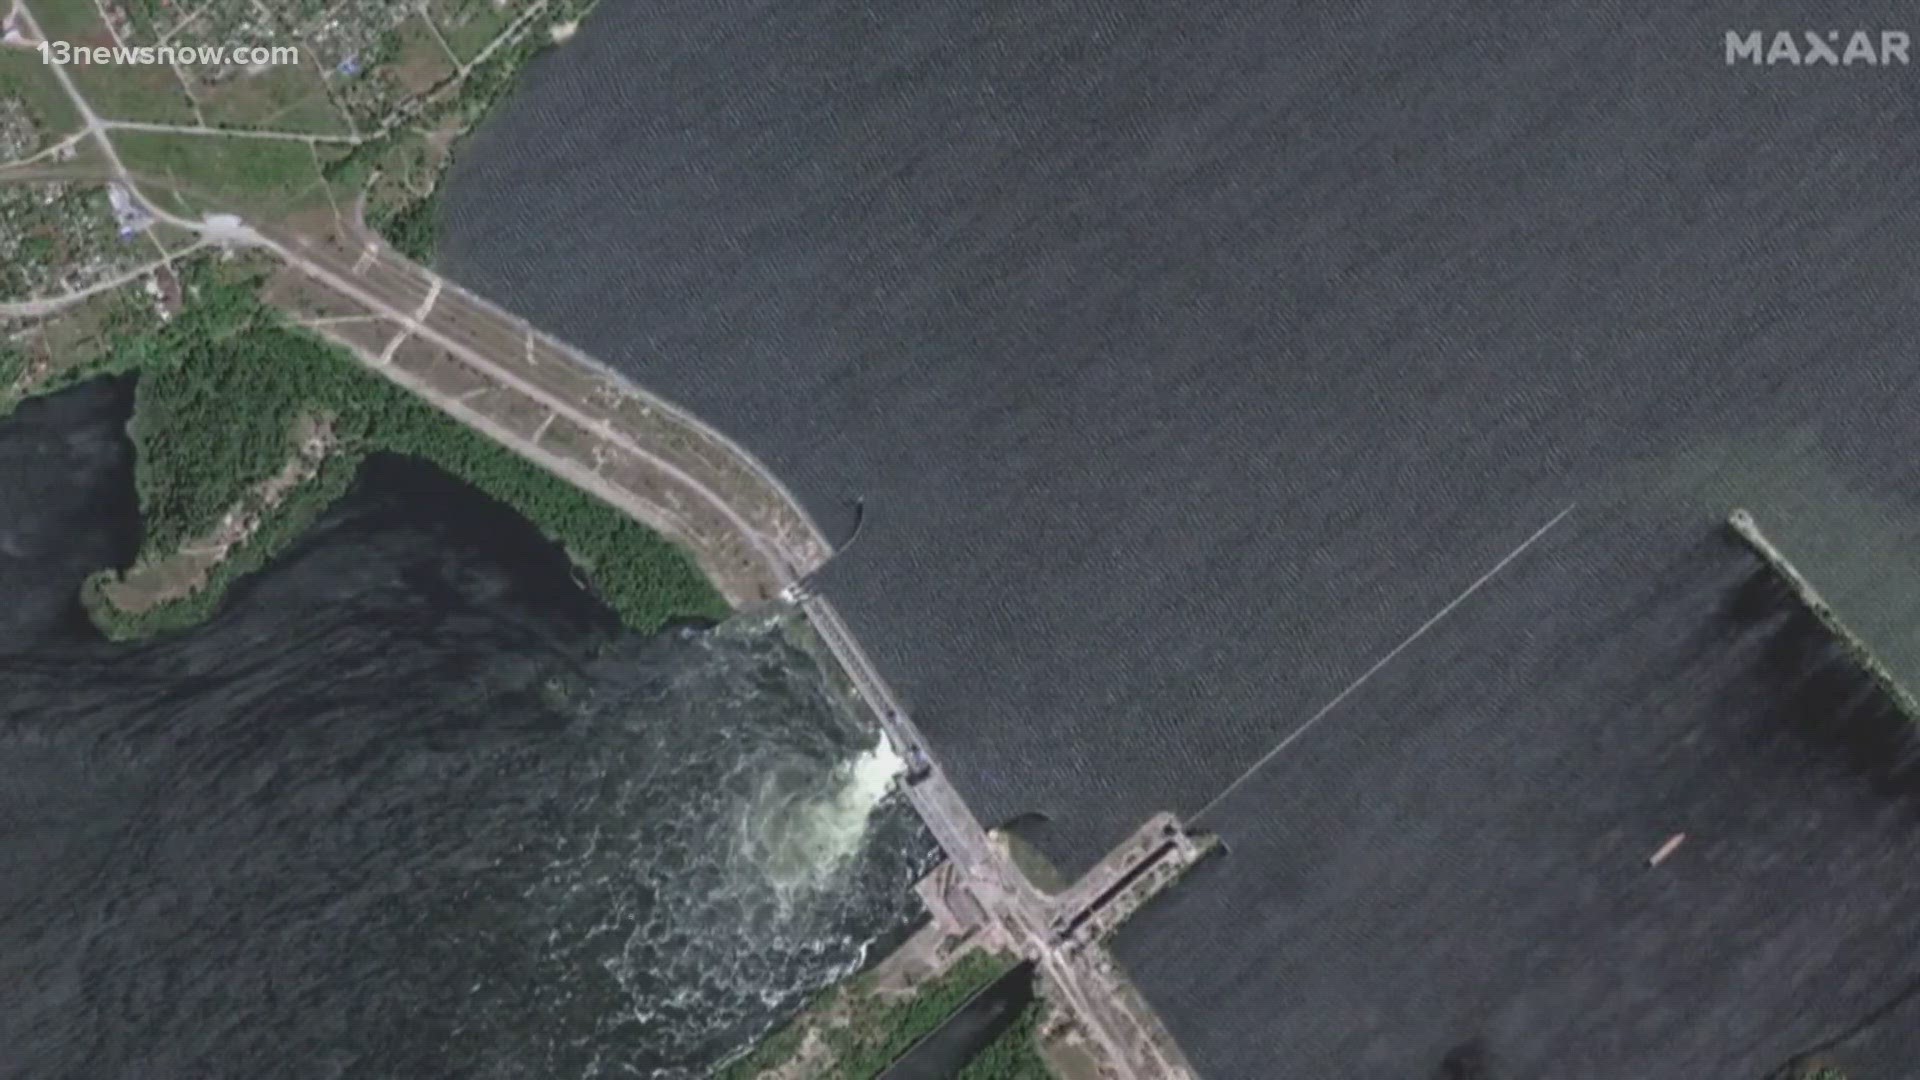 Ukrainian and Russian officials are accusing each other of bombing the dam, which both nations rely on.